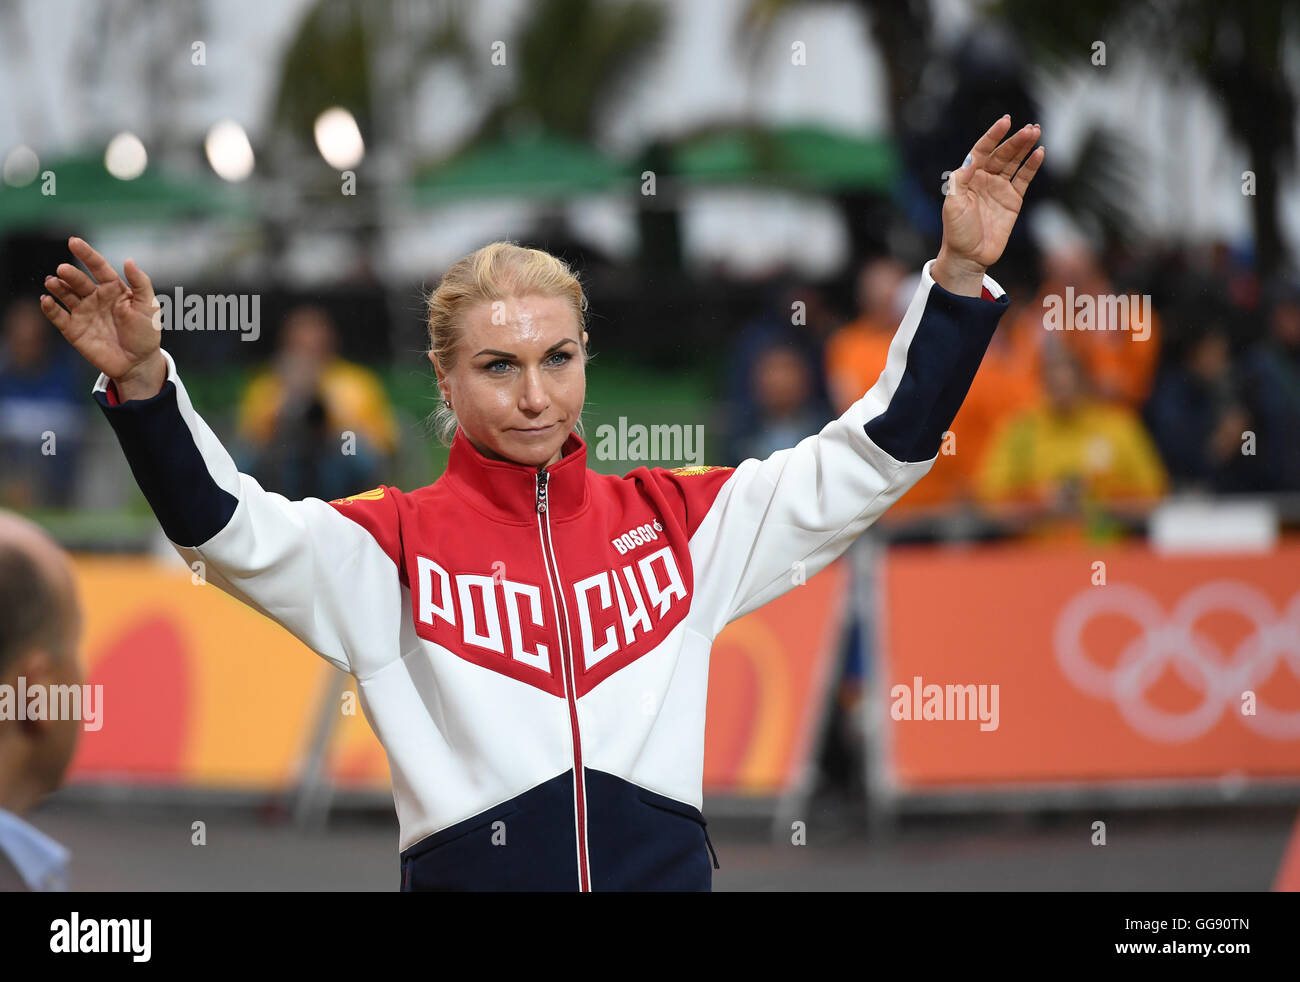 Rio de Janeiro, Brazil. 10th Aug, 2016. Second placed Olga Zabelinskaya (L) of Russia celebrates on the podium after the women's Individual Time Trial of the Rio 2016 Olympic Games Road Cycling events at Pontal in Rio de Janeiro, Brazil, 10 August 2016. APhoto: Soeren Stache/dpa/Alamy Live News Stock Photo